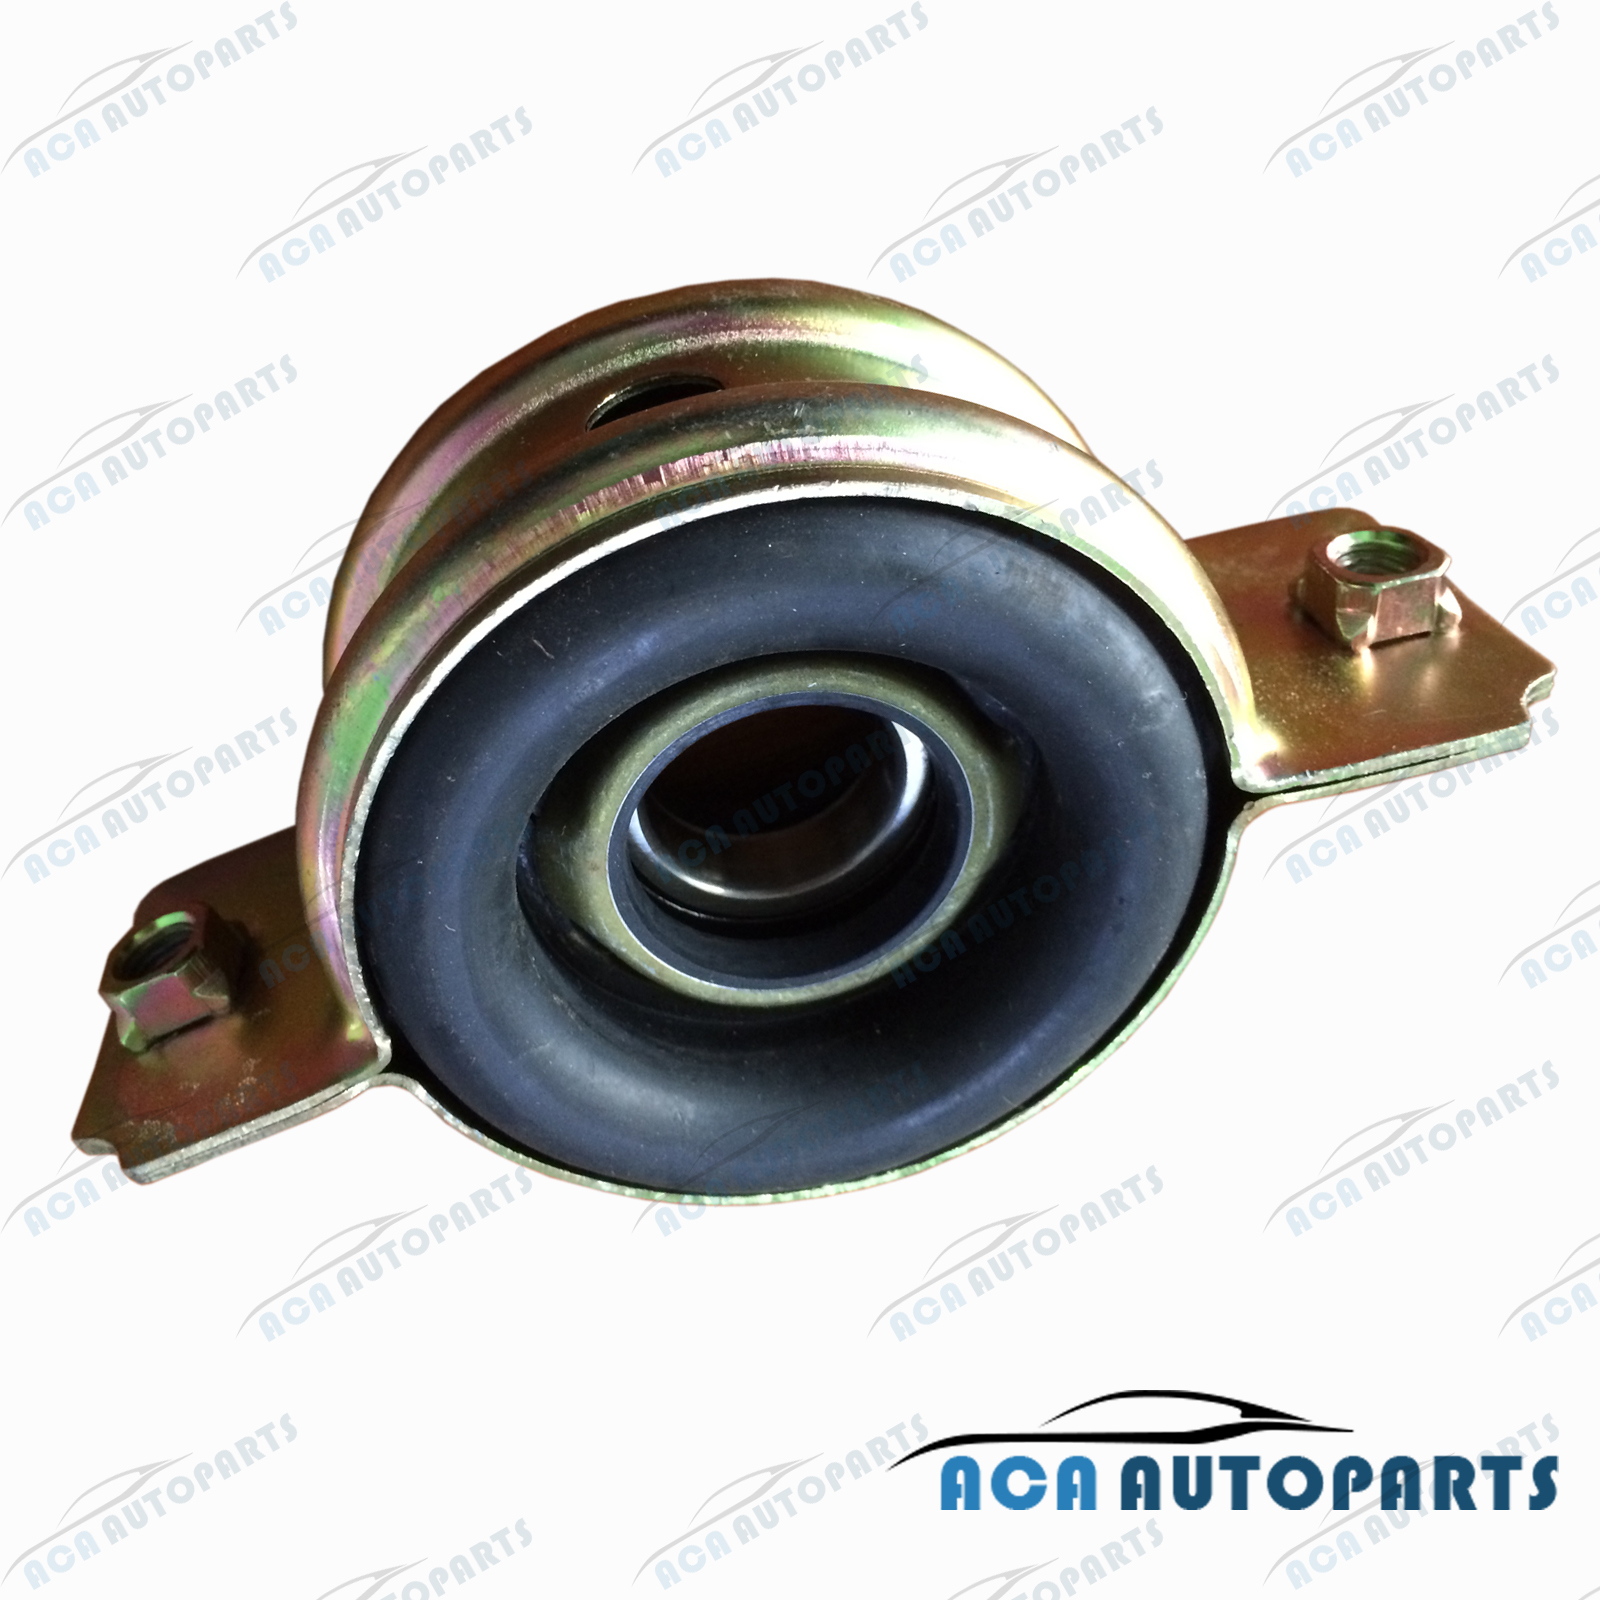 centre bearing toyota hilux #7